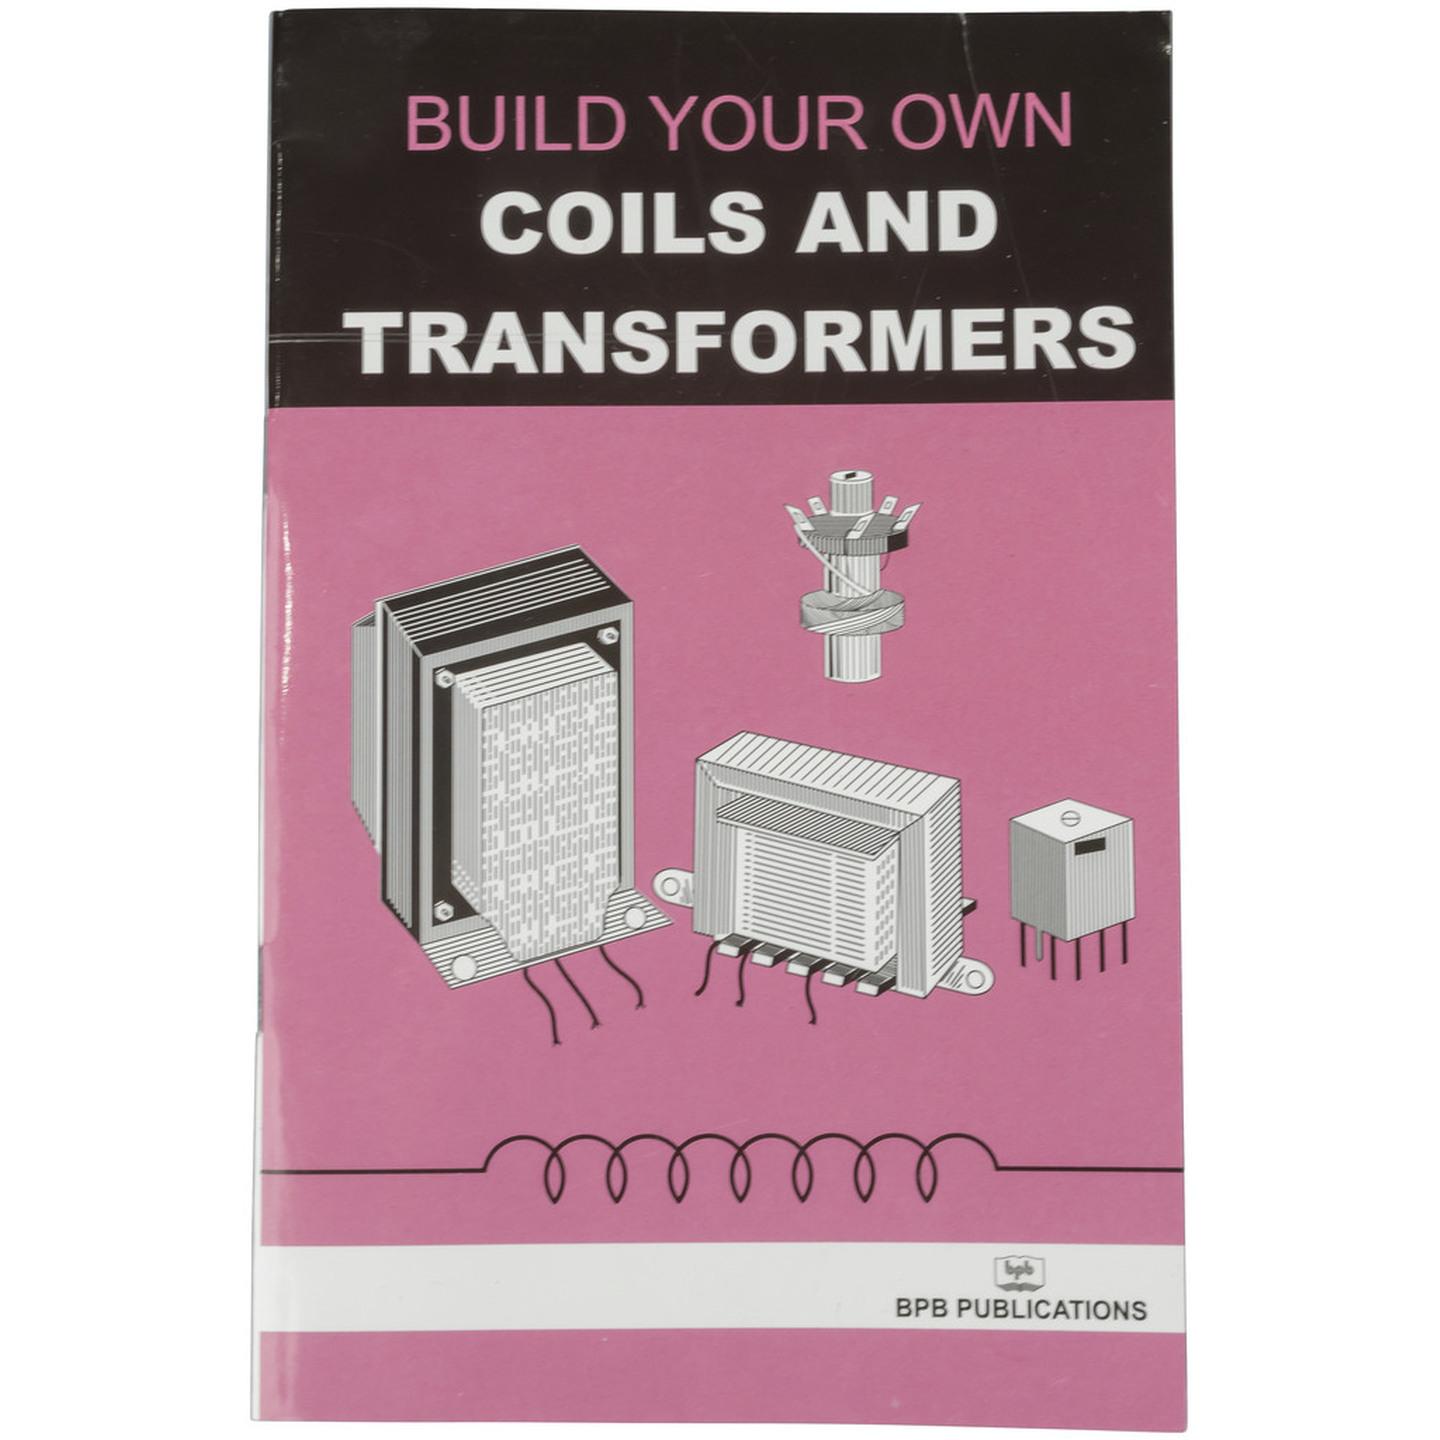 Build Your Own Coils and Transformers Book